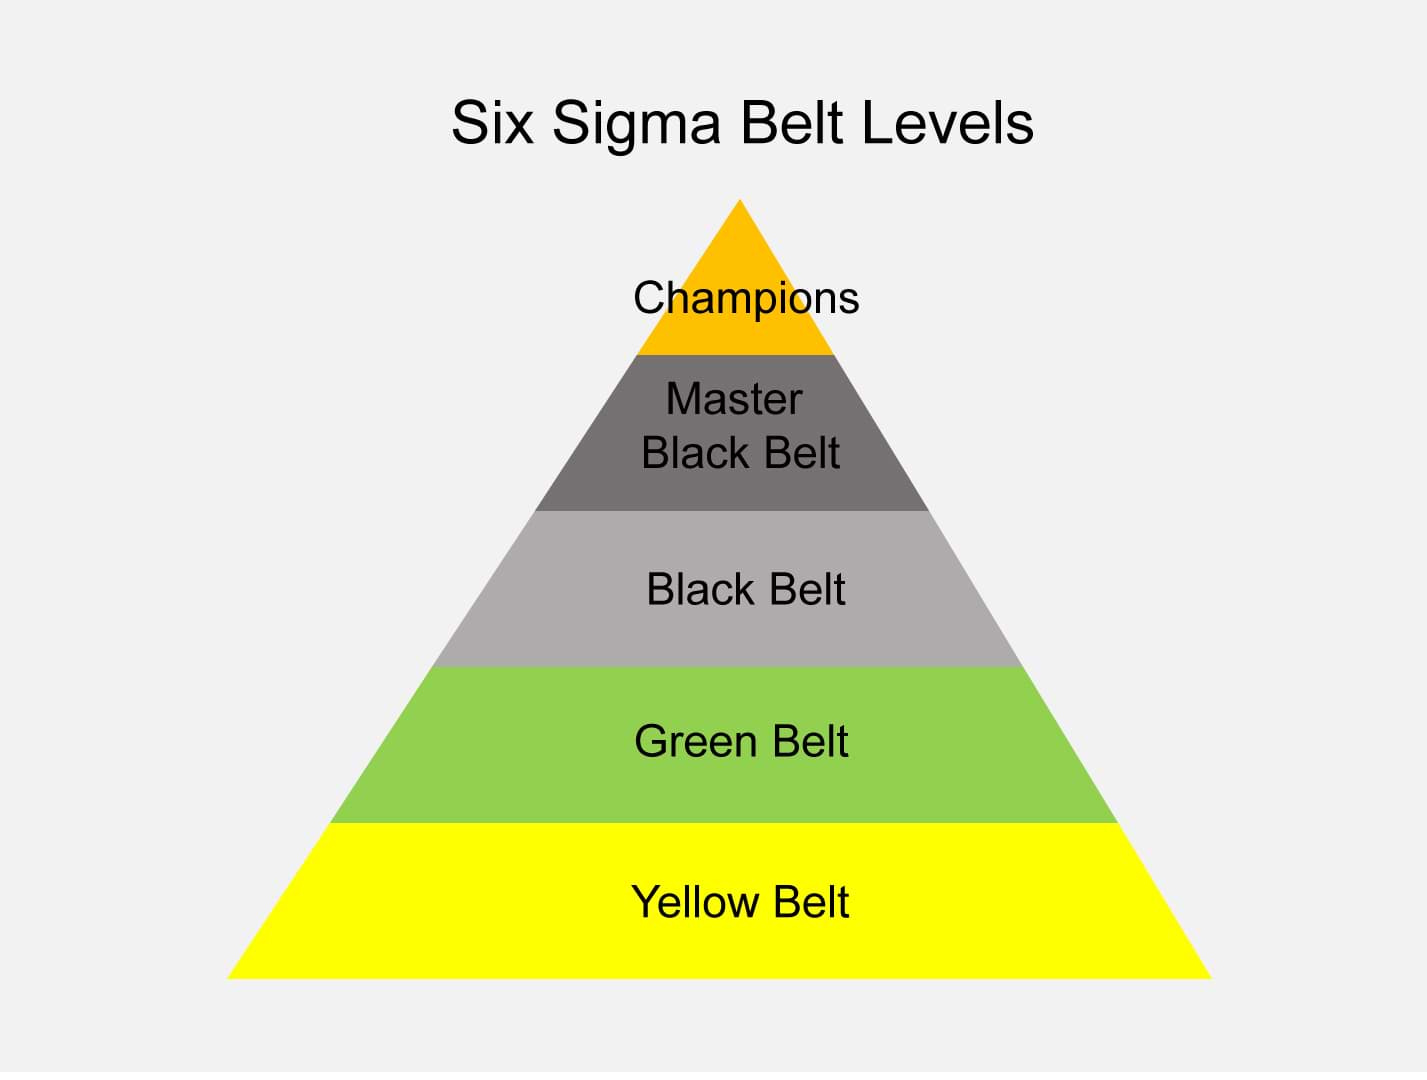 Six Sigma Belt Levels - What do they Mean?